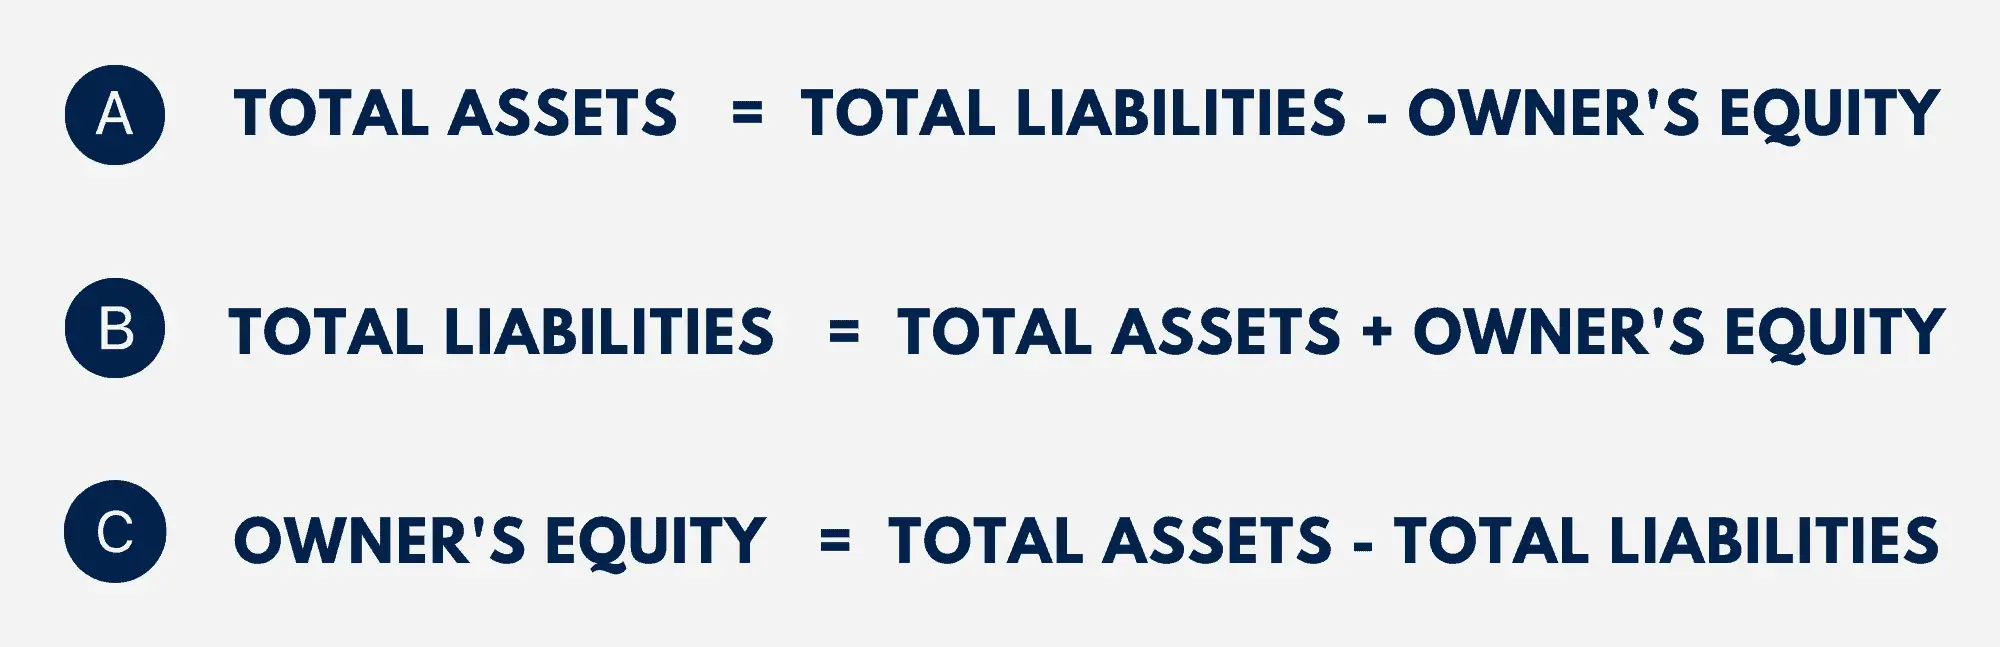 Option A: Total Assets   =  Total Liabilities - Owner's Equity, Option B: Total Liabilities   =  Total Assets + Owner's Equity, Option C:  Owner's Equity   =  Total Assets - Total Liabilities 